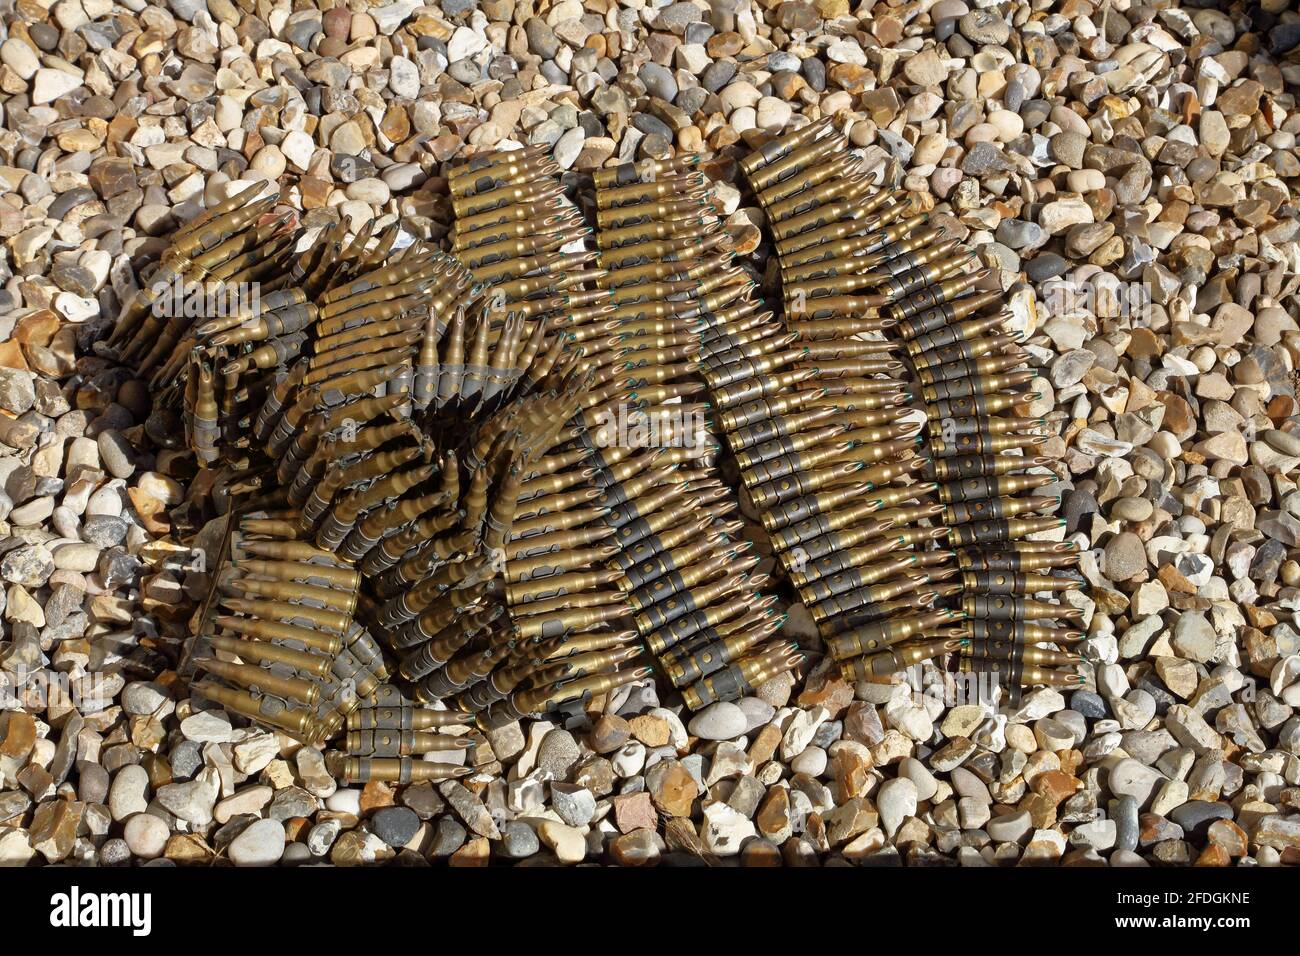 two belts of brass cased British army issue SLR blanks awaiting disposal and delivered in the incorrect boxes. Stock Photo